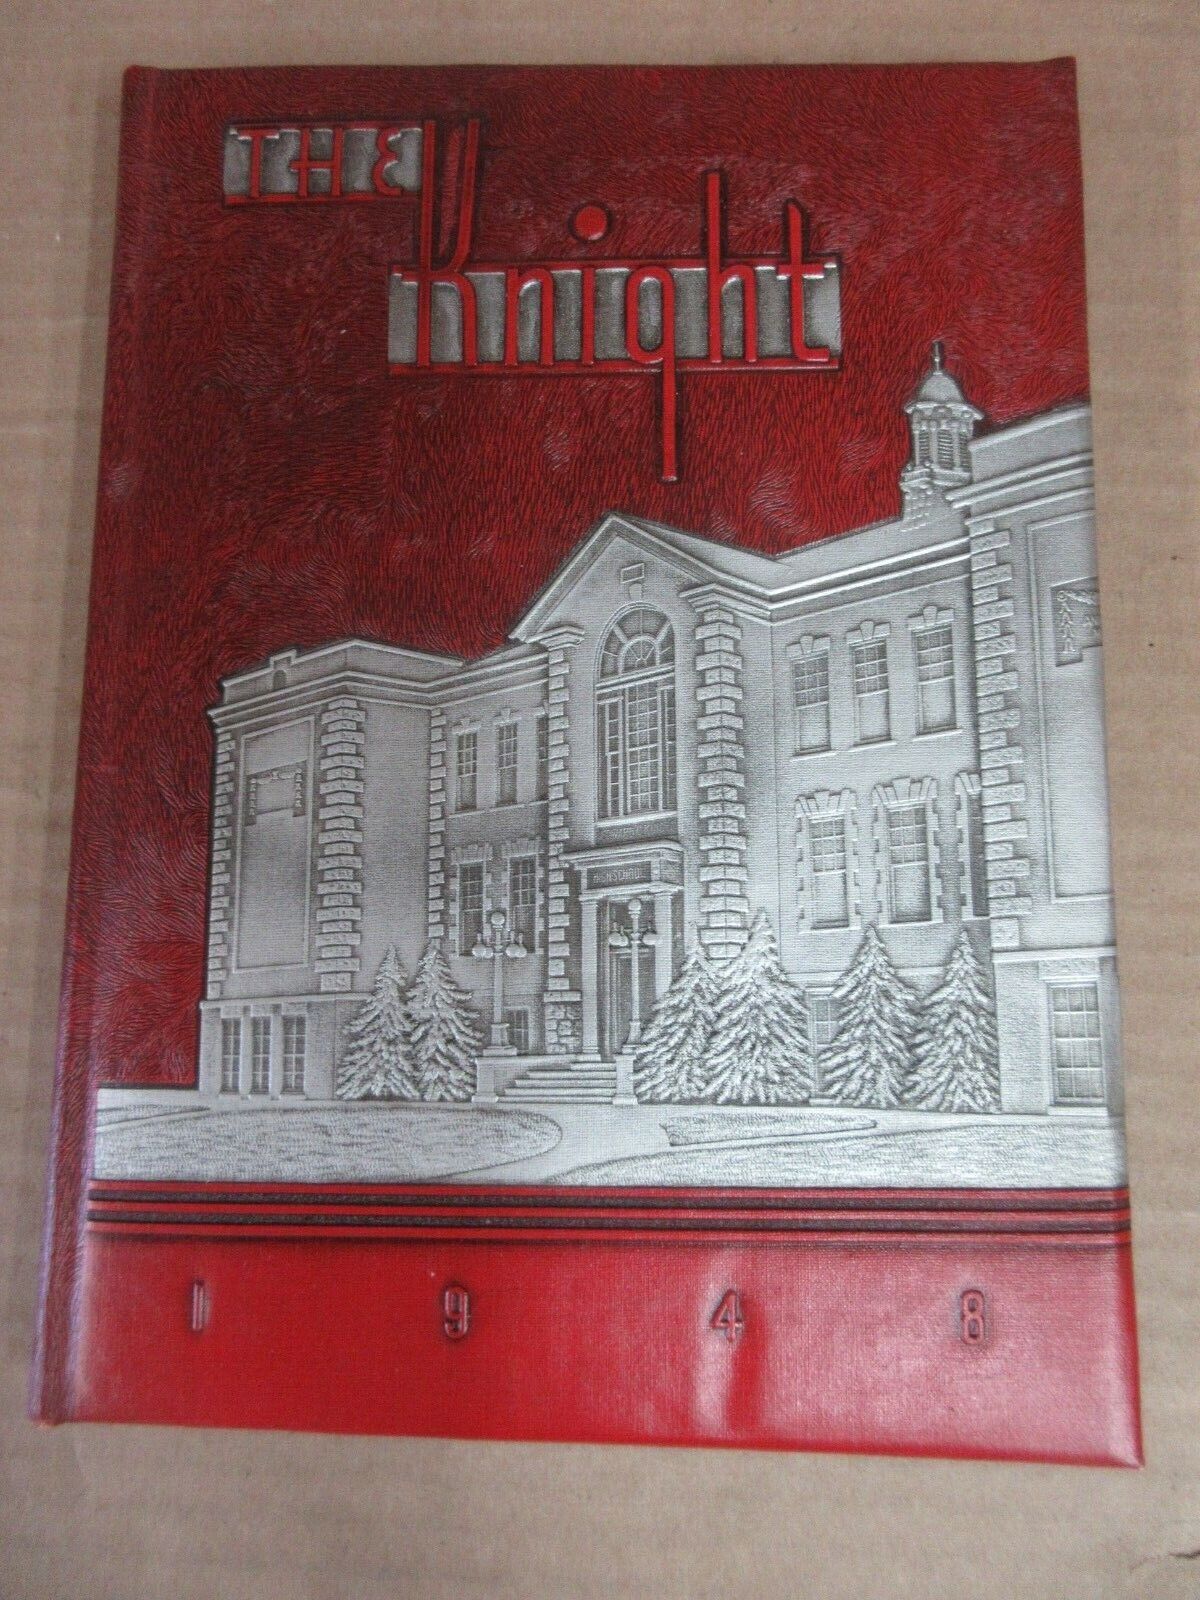 Vintage The Knight 1948 Yearbook Collingswood High School Collingswood NJ 